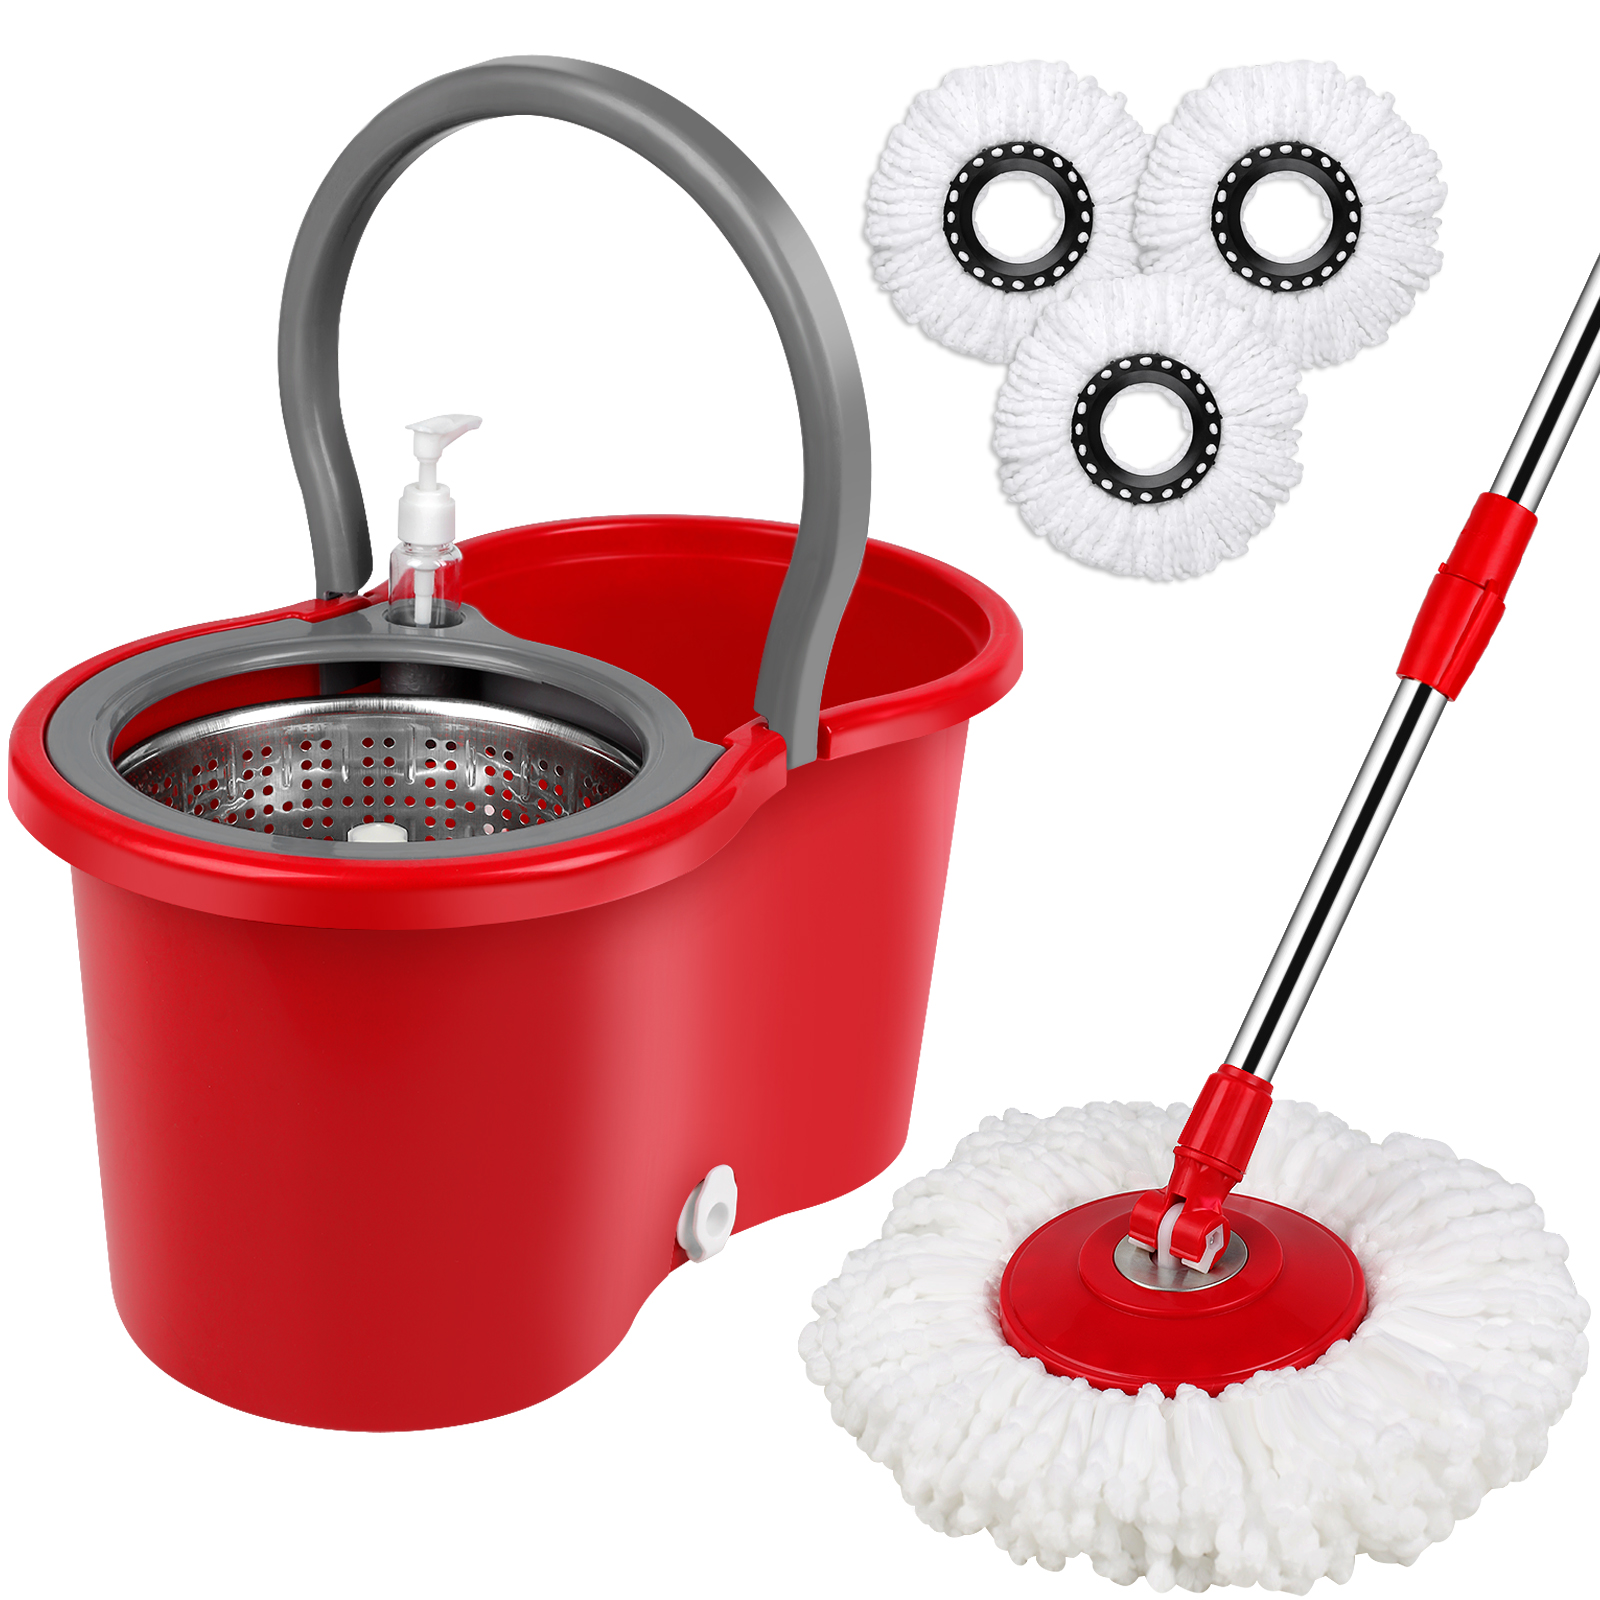 

Spin Mop And Bucket With Wringer Set,360 Spinning Mop Bucket System With 3 Microfiber Mop Heads,61" Inch Stainless Steel Adjustable Handle For Floor Cleaning ,